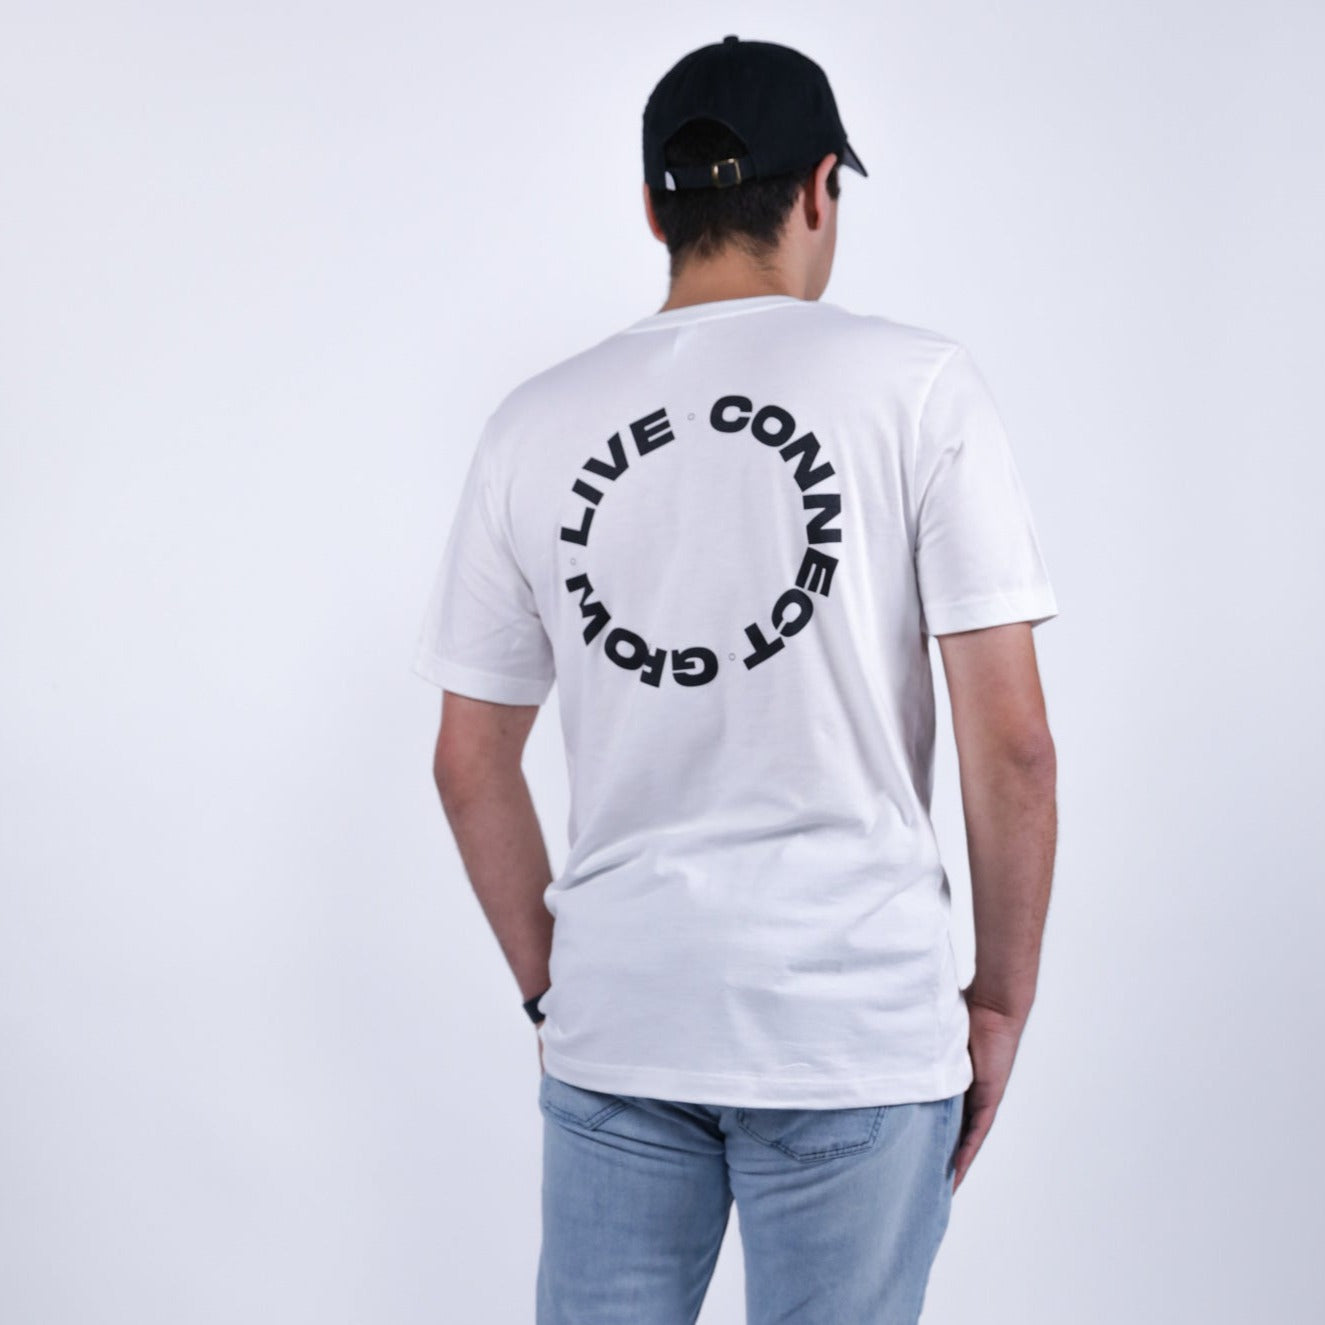 Connect. Grow. Live. Tee (White Edition)